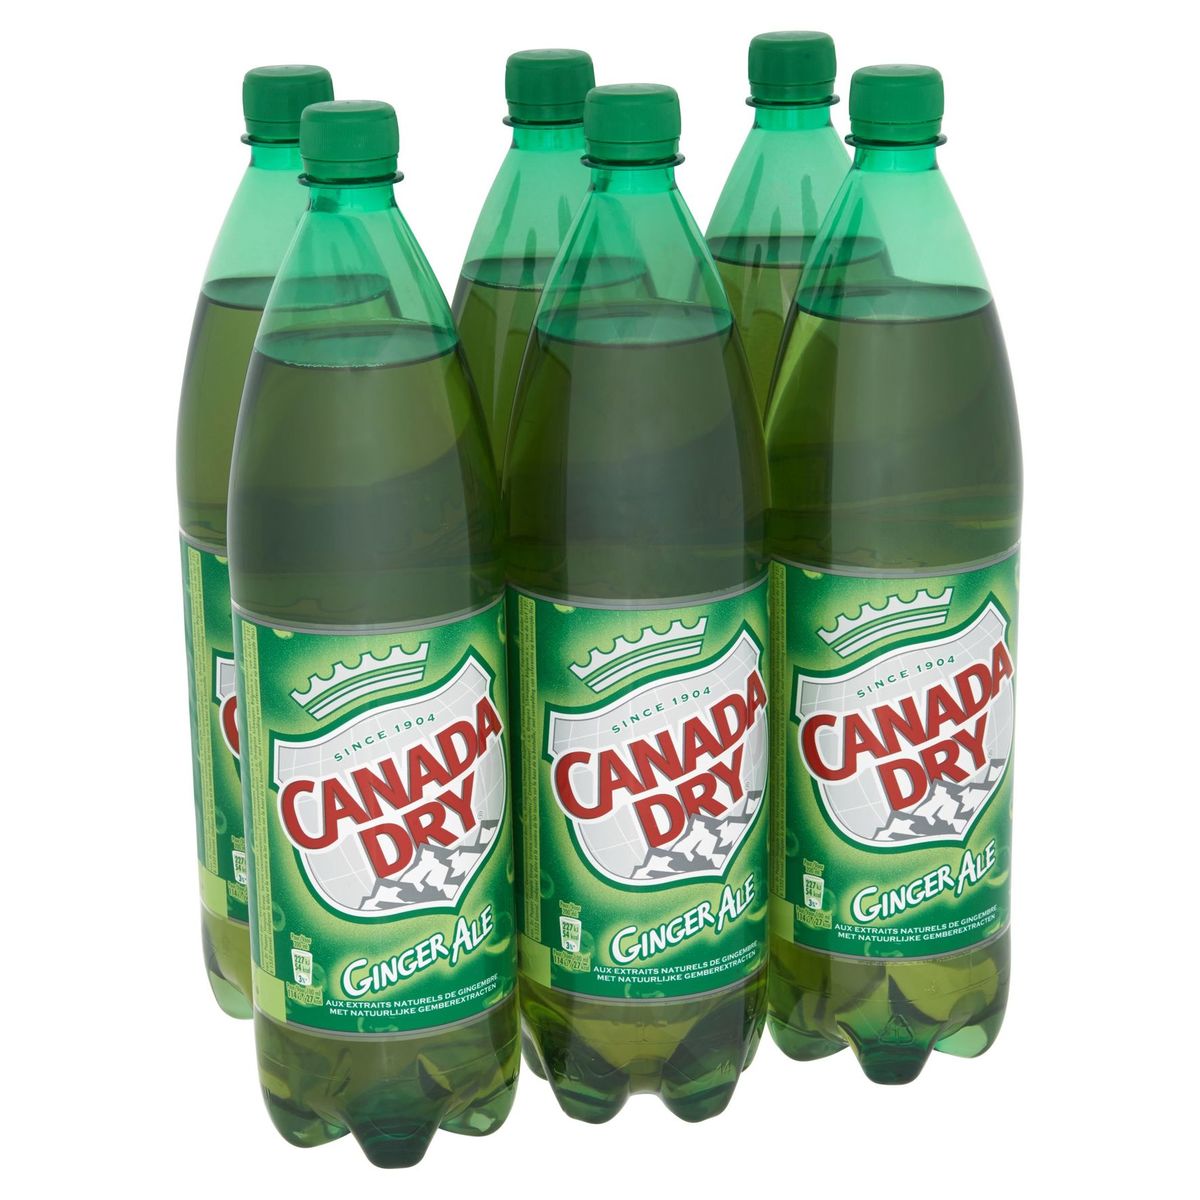 Canada Dry Ginger Ale 6 x 1.5 L